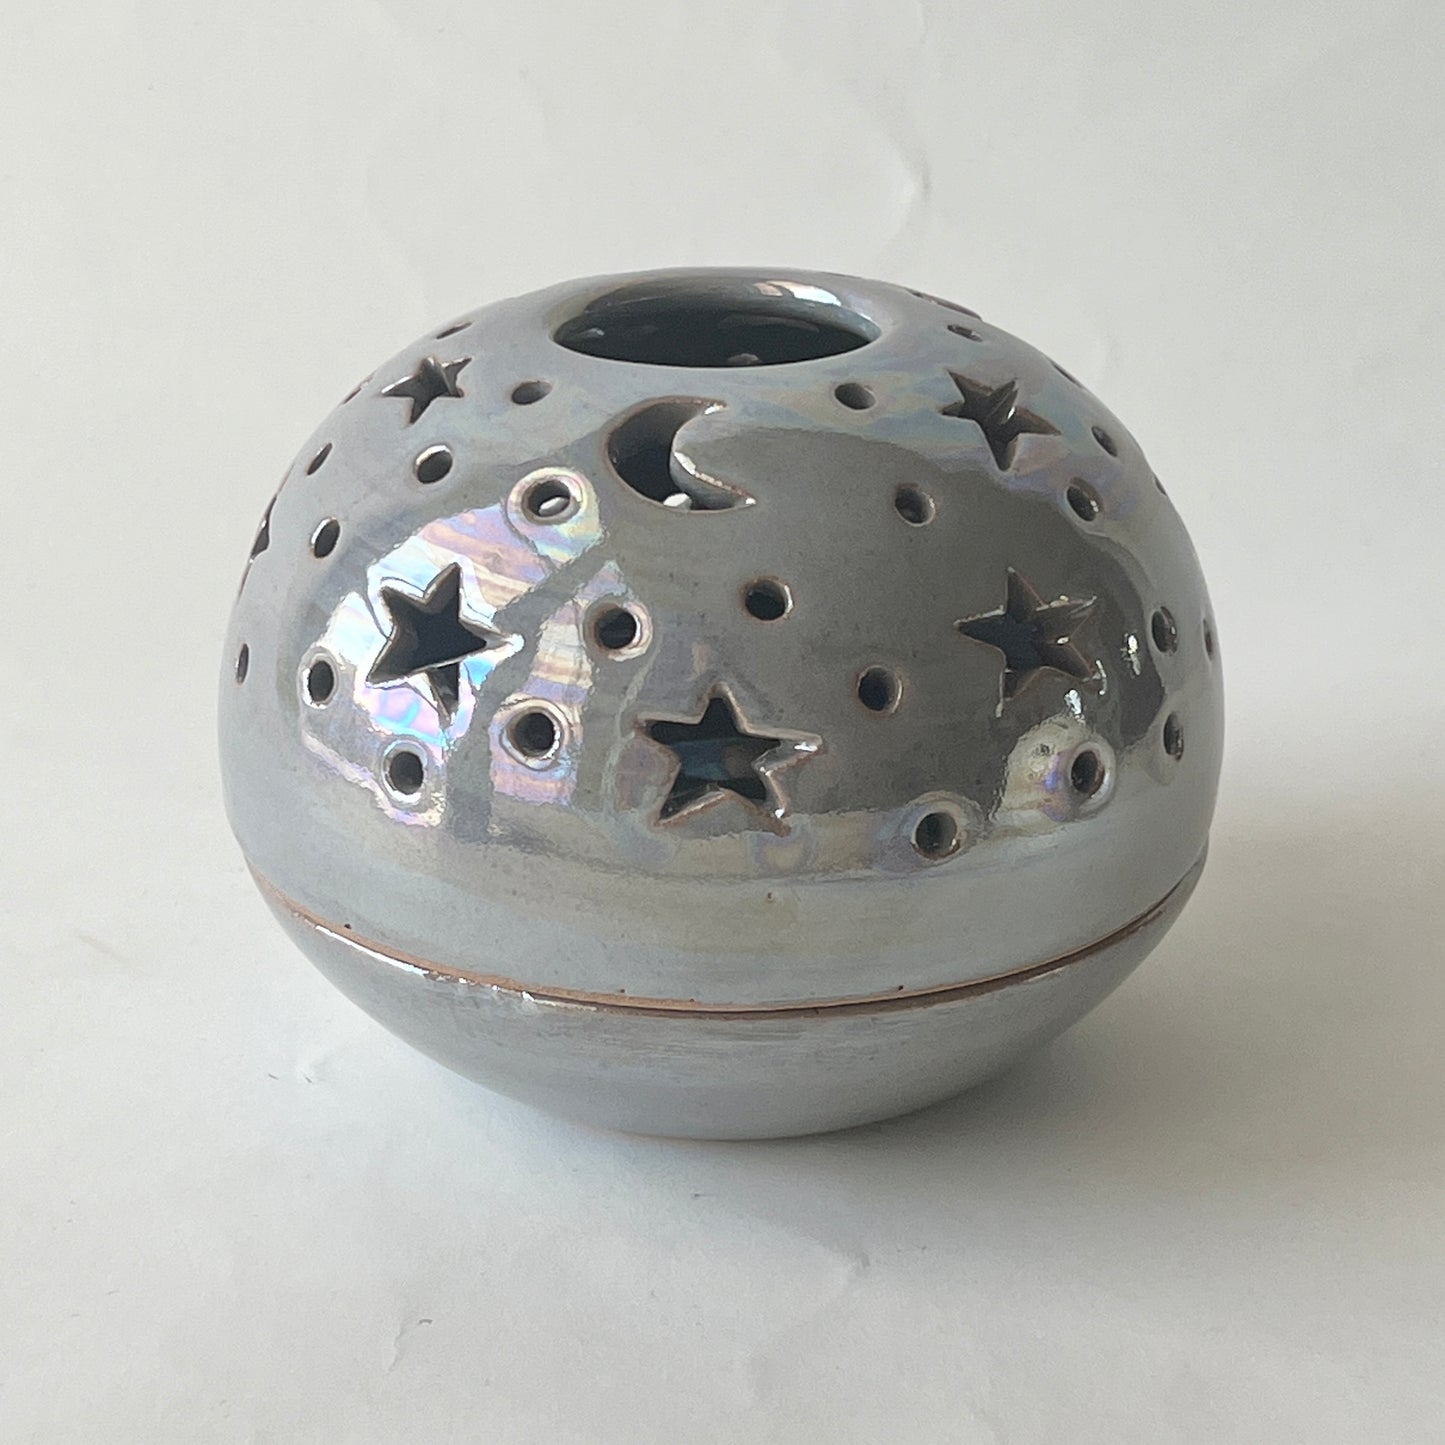 Stars in The Sky Candle Holder - Grey Iridescent